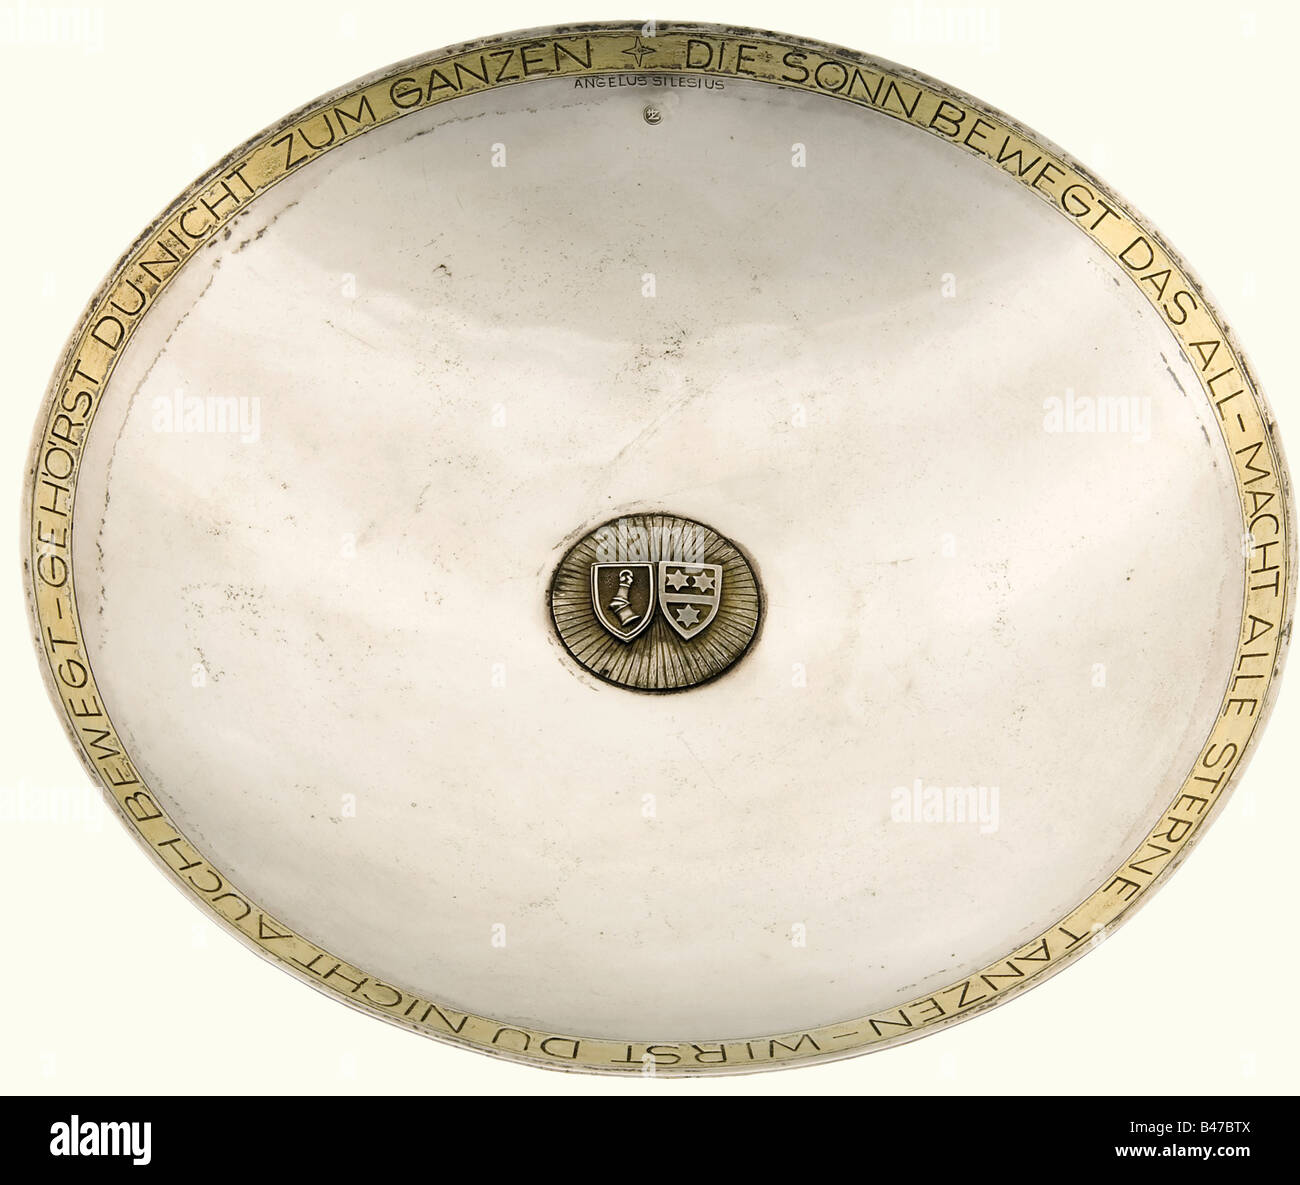 Hermann Göring and Emmy Sonnemann, a silver presentation bowl A shallow silver bowl with gilded rim, bearing a quotation from Angelus Silesius 'Die Sonne bewegt das All - Macht alle Sterne tanzen - Wirst du nicht auch bewegt - Gehörst du nicht zum Ganzen' (the sun moves everything - makes all the stars dance - if you're not moved - you don't belong to anything). In the centre there is a gilded sun with the coats of arms of Hermann Göring and his wife Emmy Sonnemann. The silversmith's mark of Professor Herbert Zeitner is in the 12 o'clock position. Marked, 'Zeit, Stock Photo